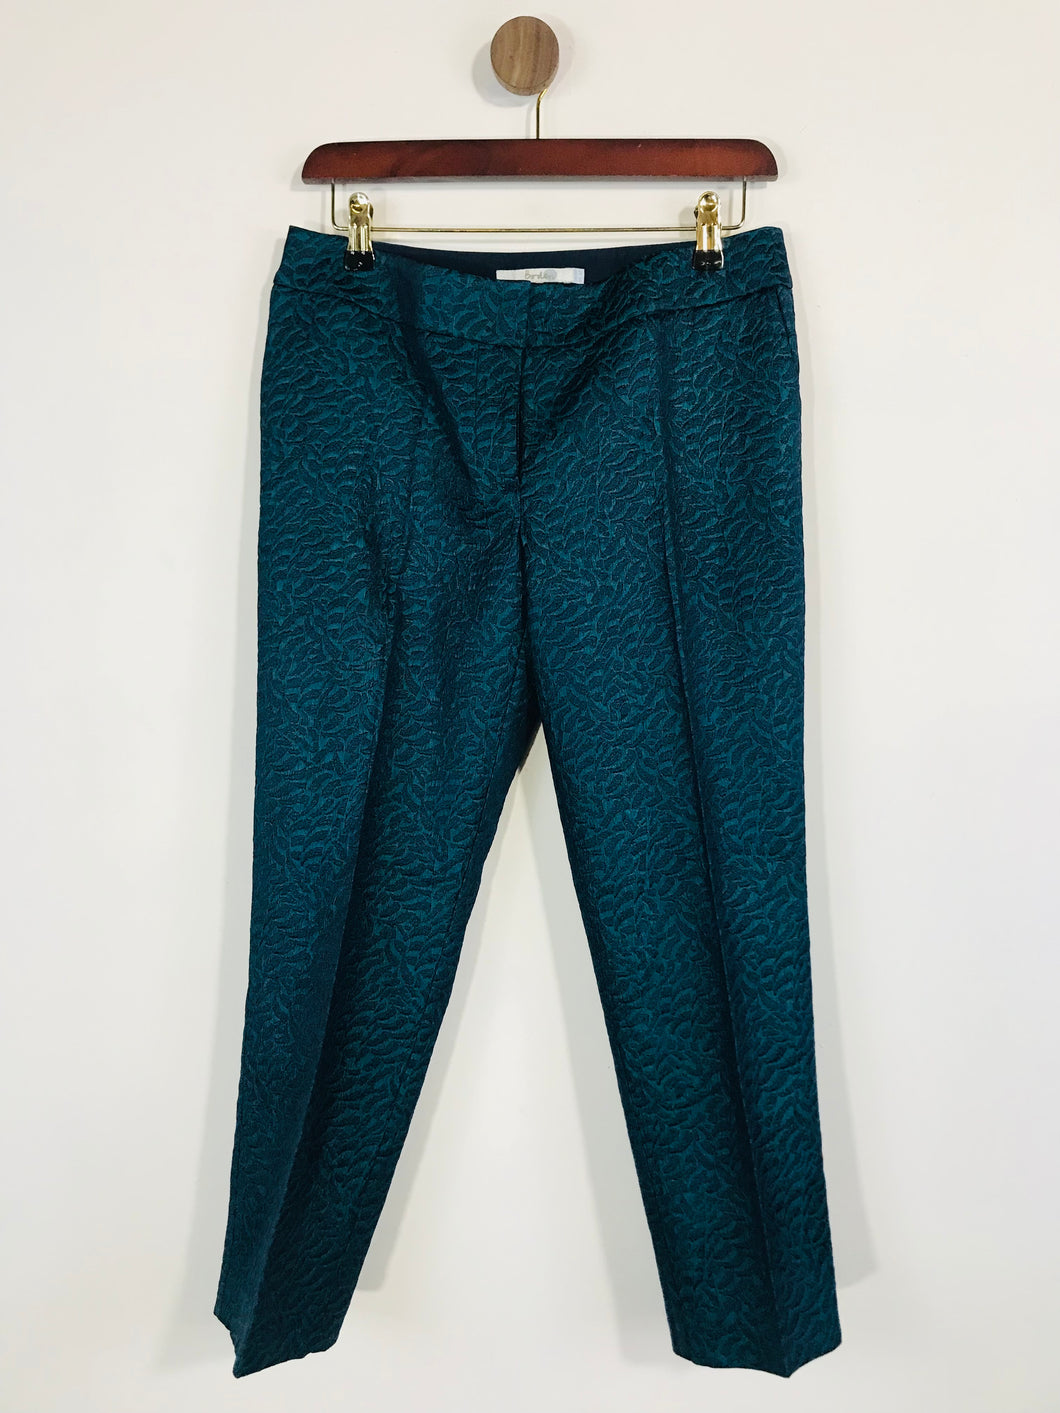 Boden Women's Leaf print Chinos Trousers | UK10 | Green